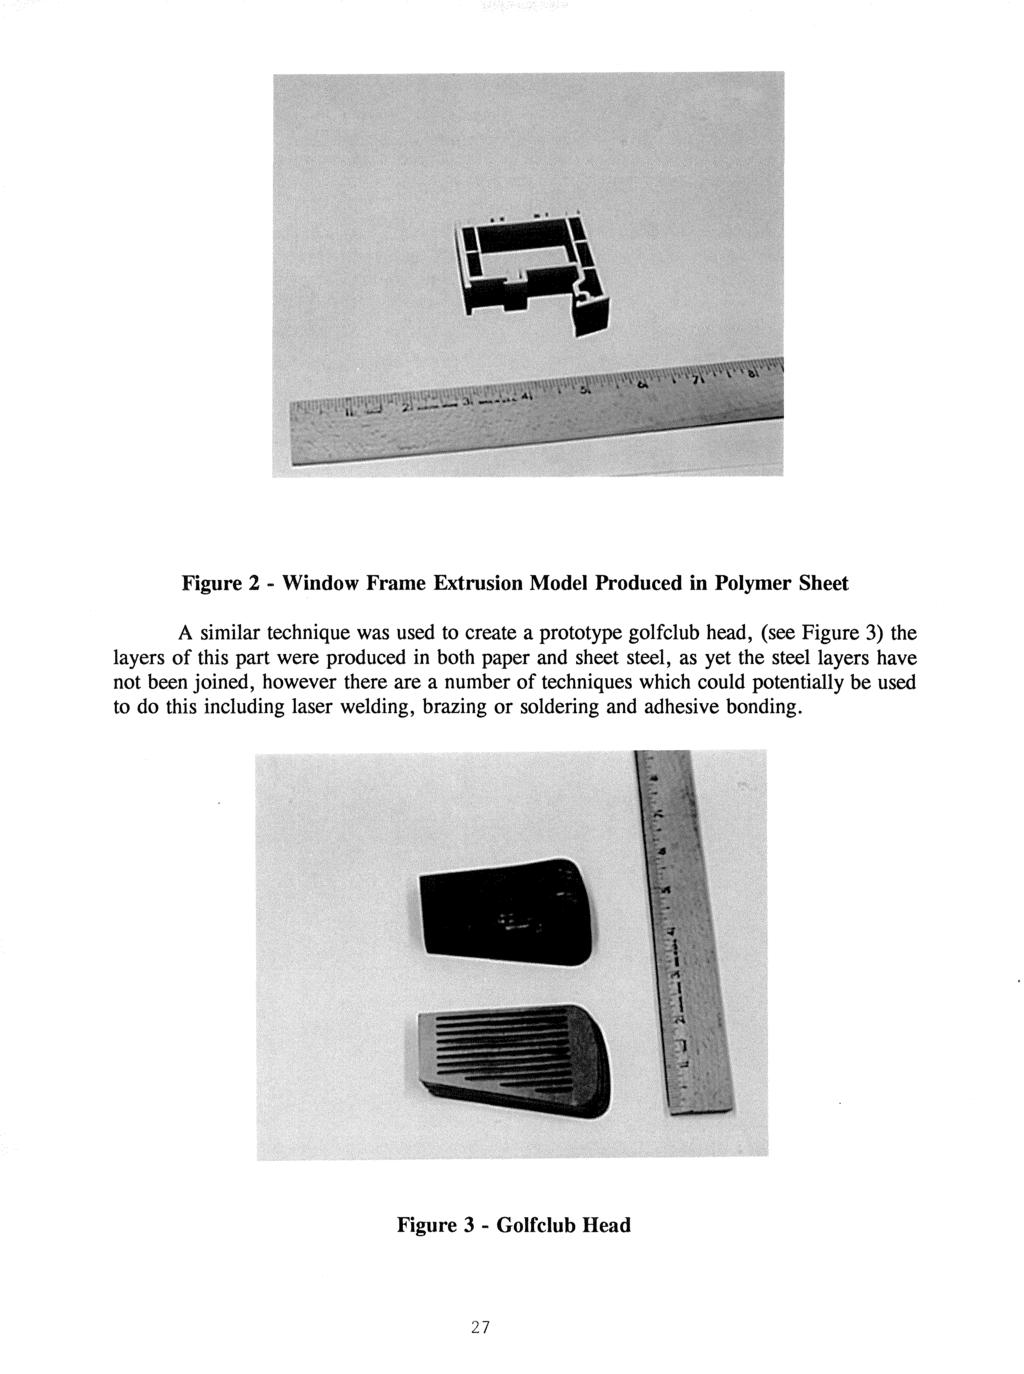 Figure 2 - Window Frame Extrusion Model Produced in Polymer Sheet A similar technique was used to create a